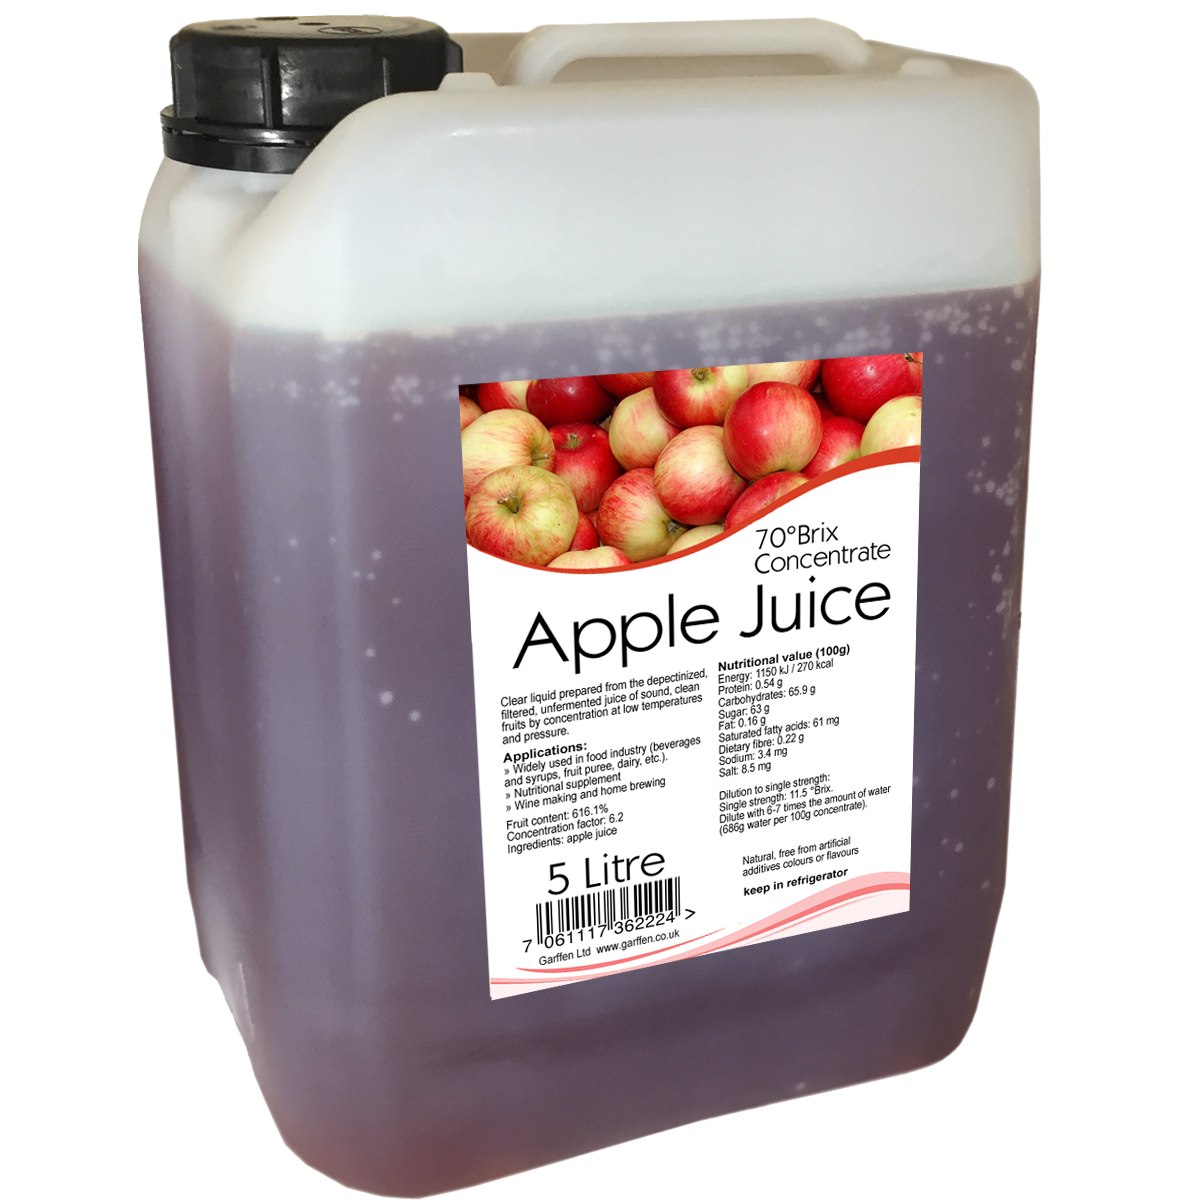 Apple juice concentrated 